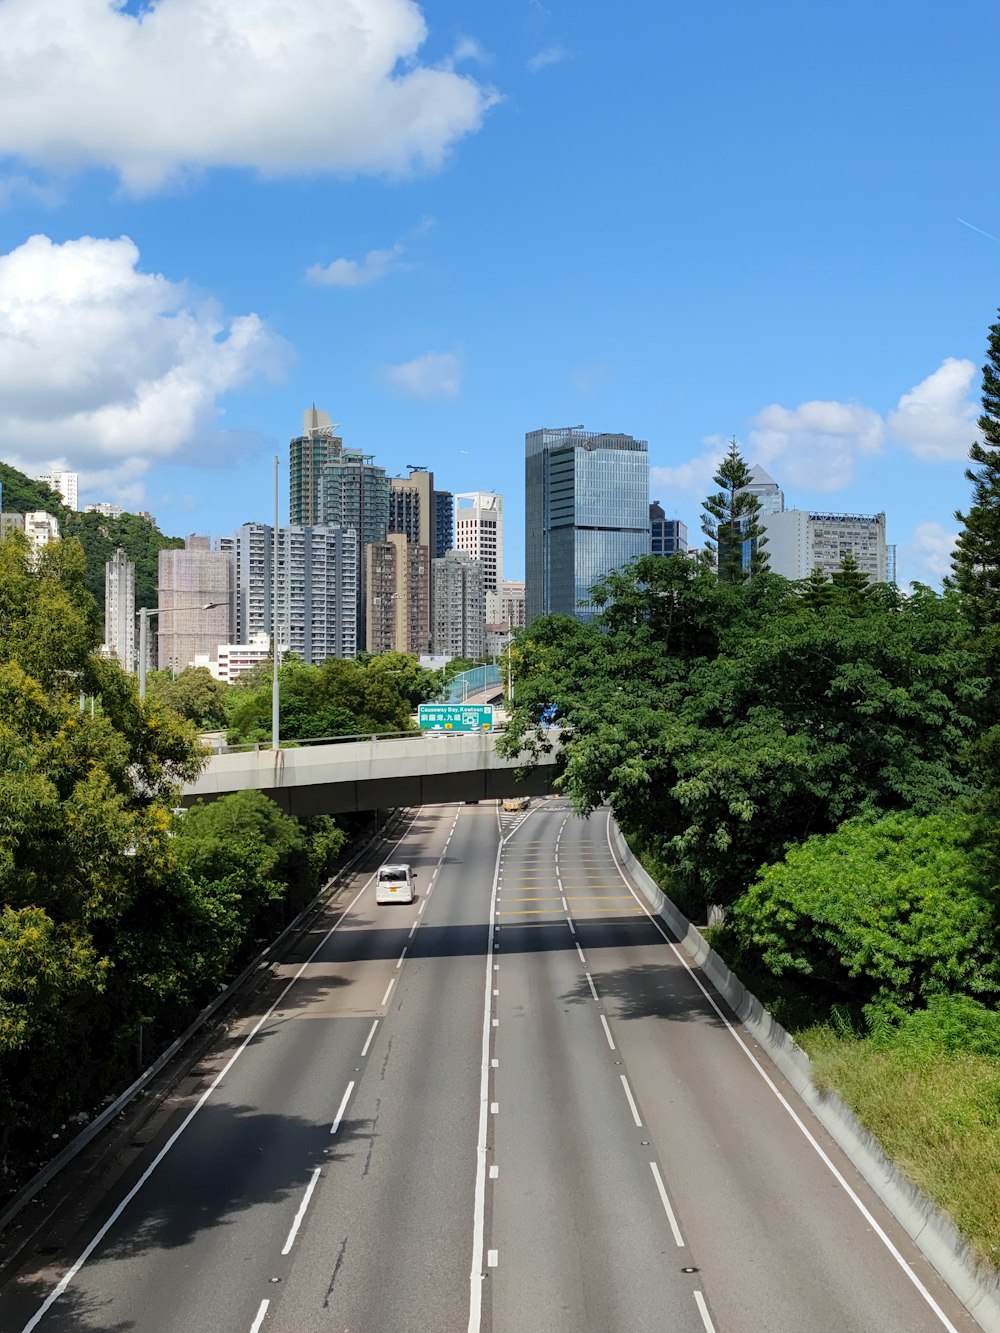 a view of a highway with a city in the background